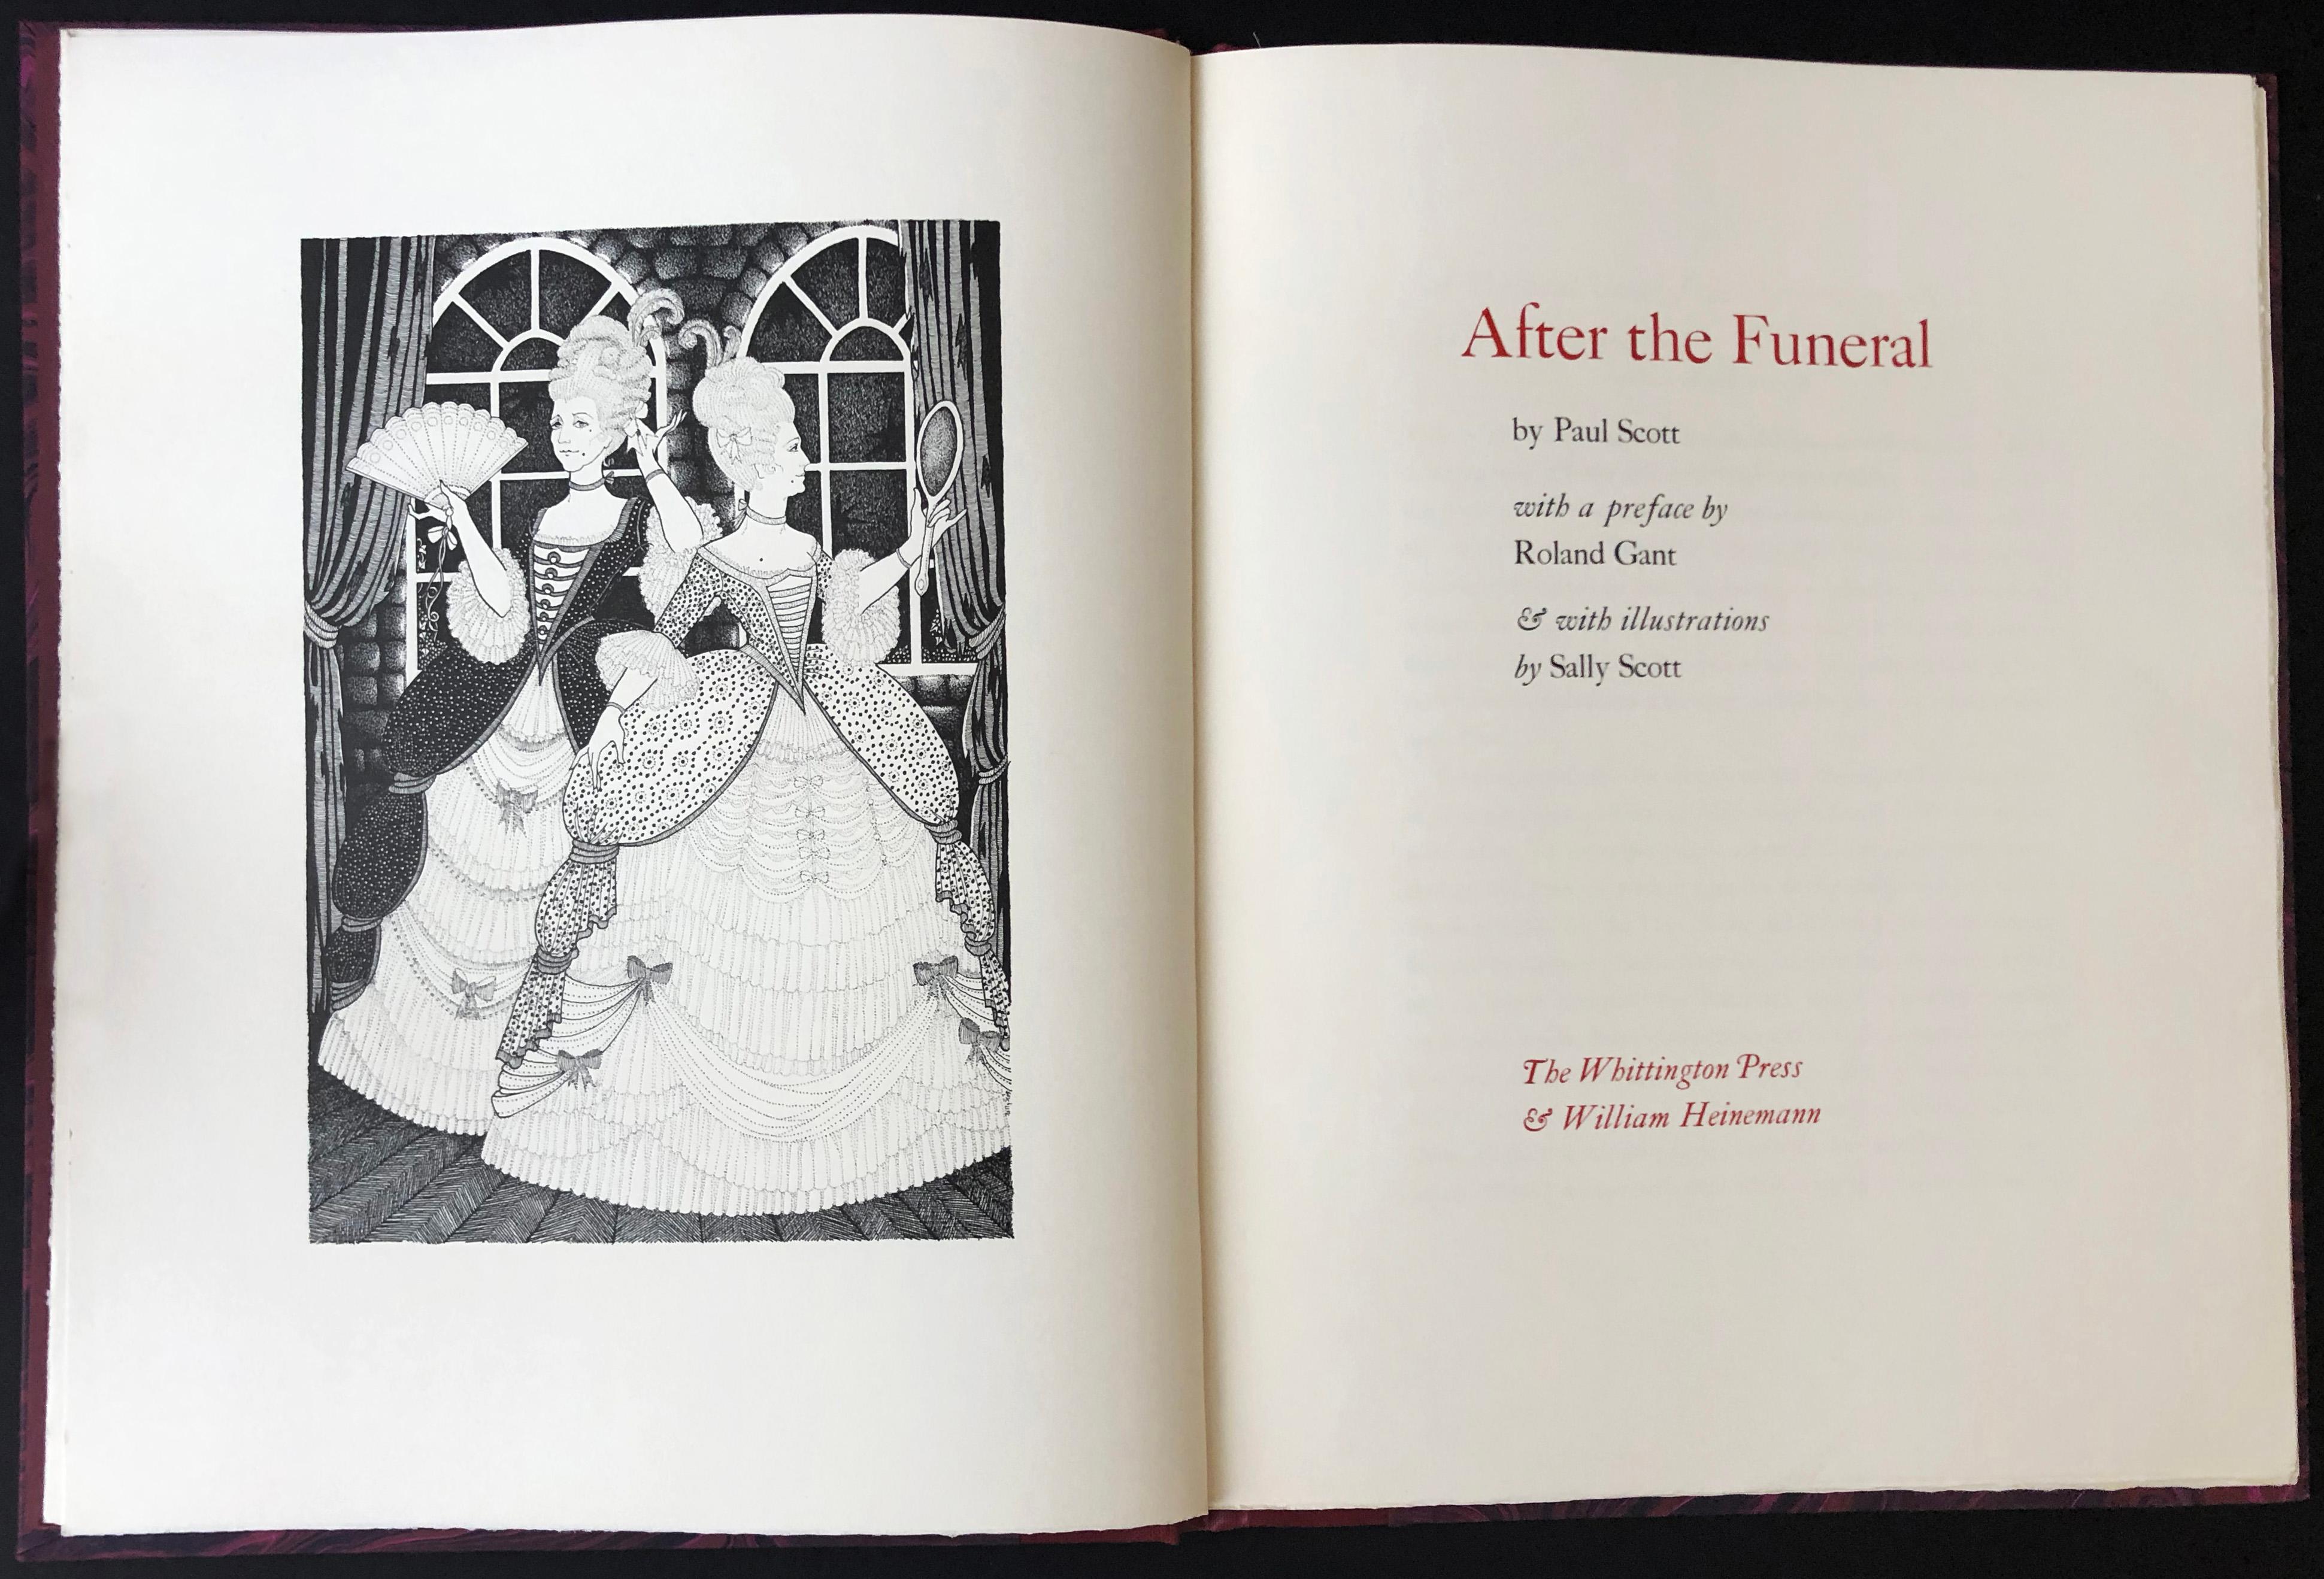 Paul Scott's After the Funeral, illustrated by Sally Scott, with an introduction by Roland Grant. 
Andoversford: Whittington Press & William Heinemann, 1979. Limited Edition. 
Royal 4to, 12 3/4 x 10 in. (320 x 250 mm), pp. xvi + 22 + vi. With 8